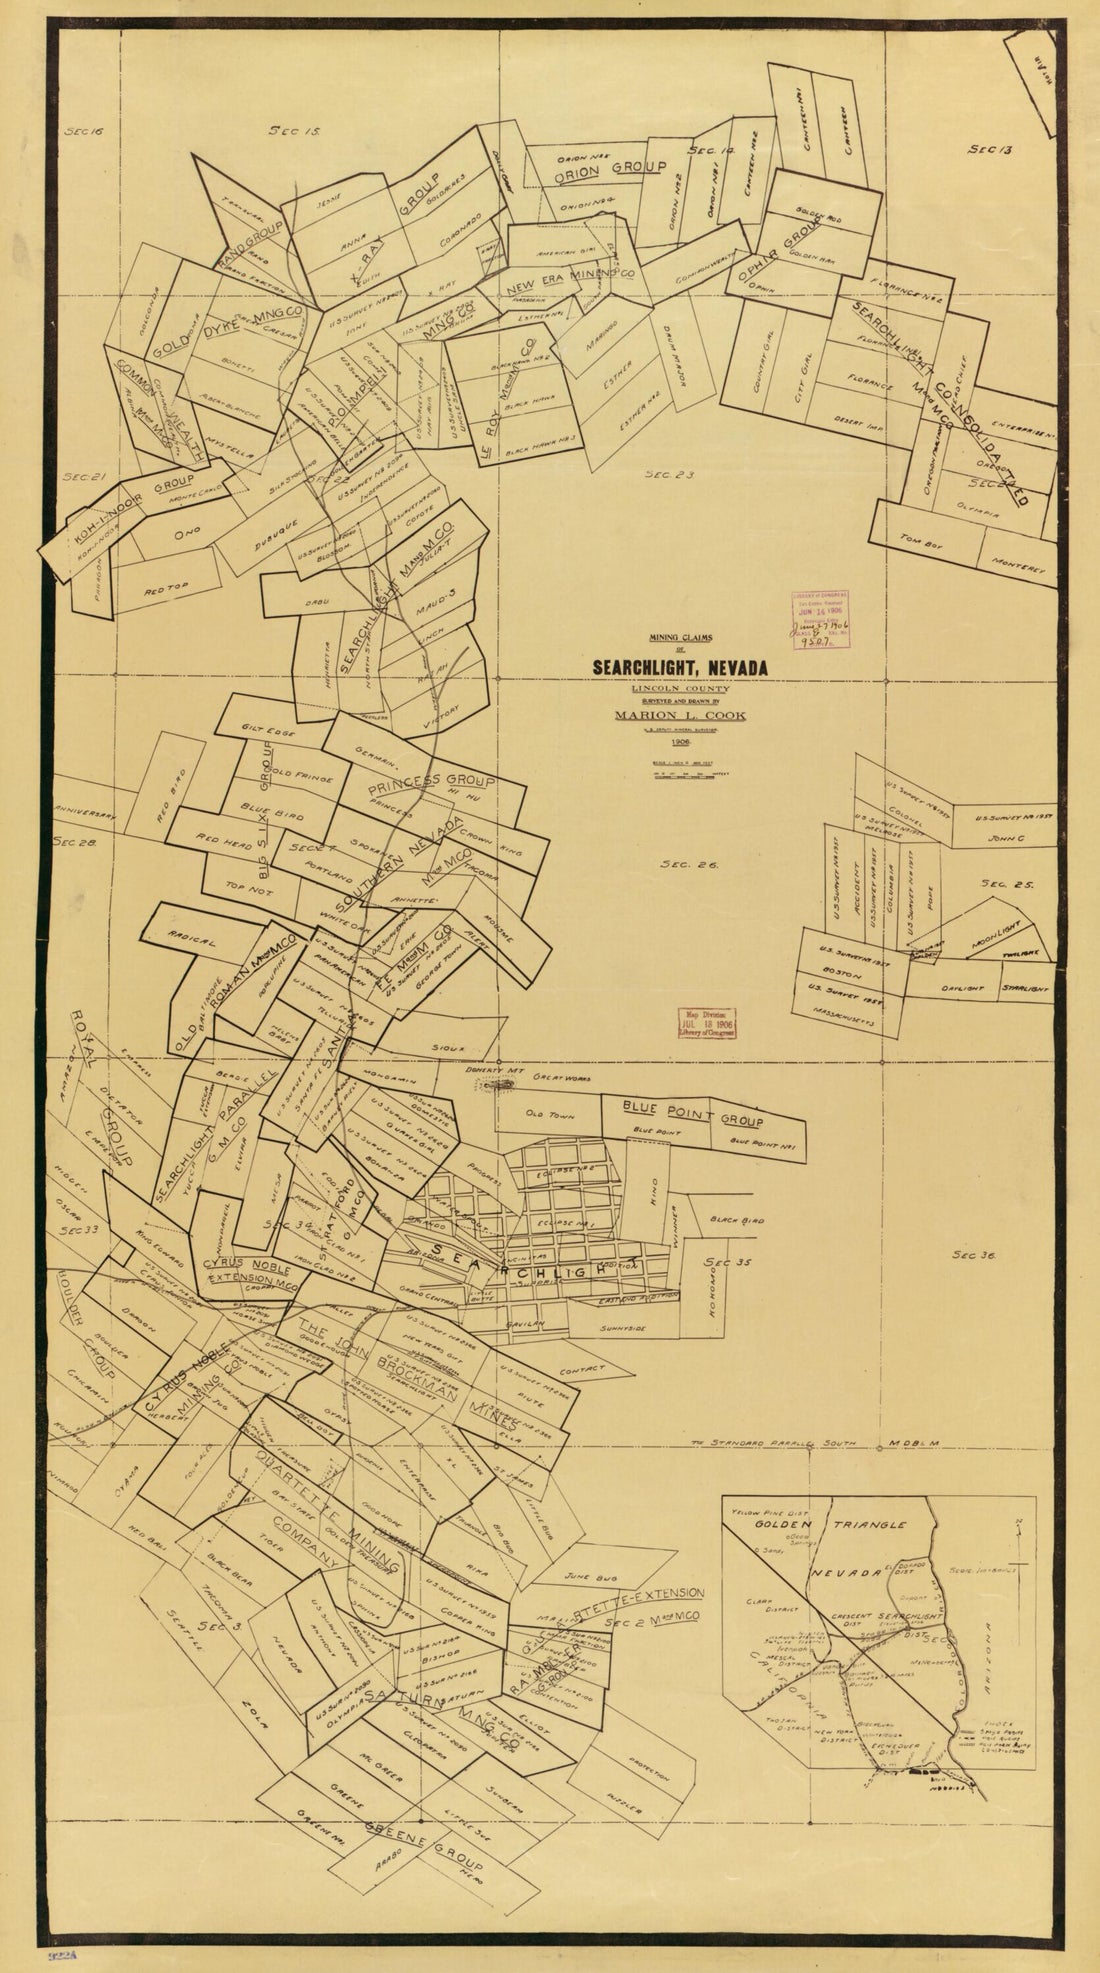 This old map of Mining Claims of Searchlight, Nevada, Lincoln County from 1906 was created by Marion L. Cook in 1906